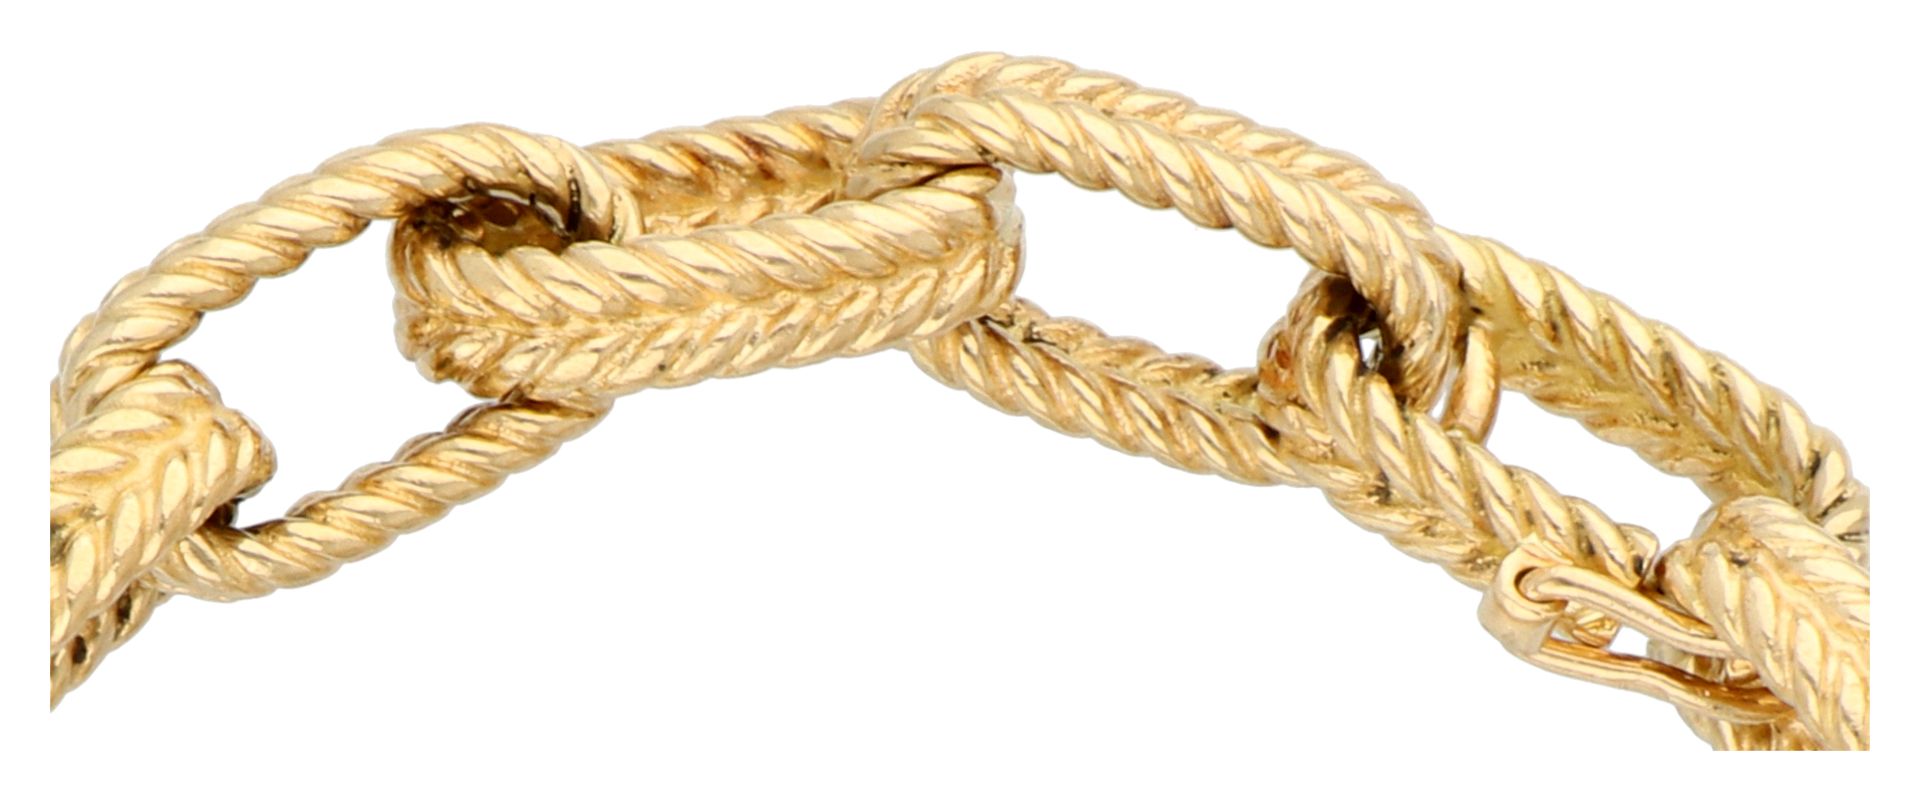 18K Yellow gold anchor link bracelet with braided details. - Image 3 of 3